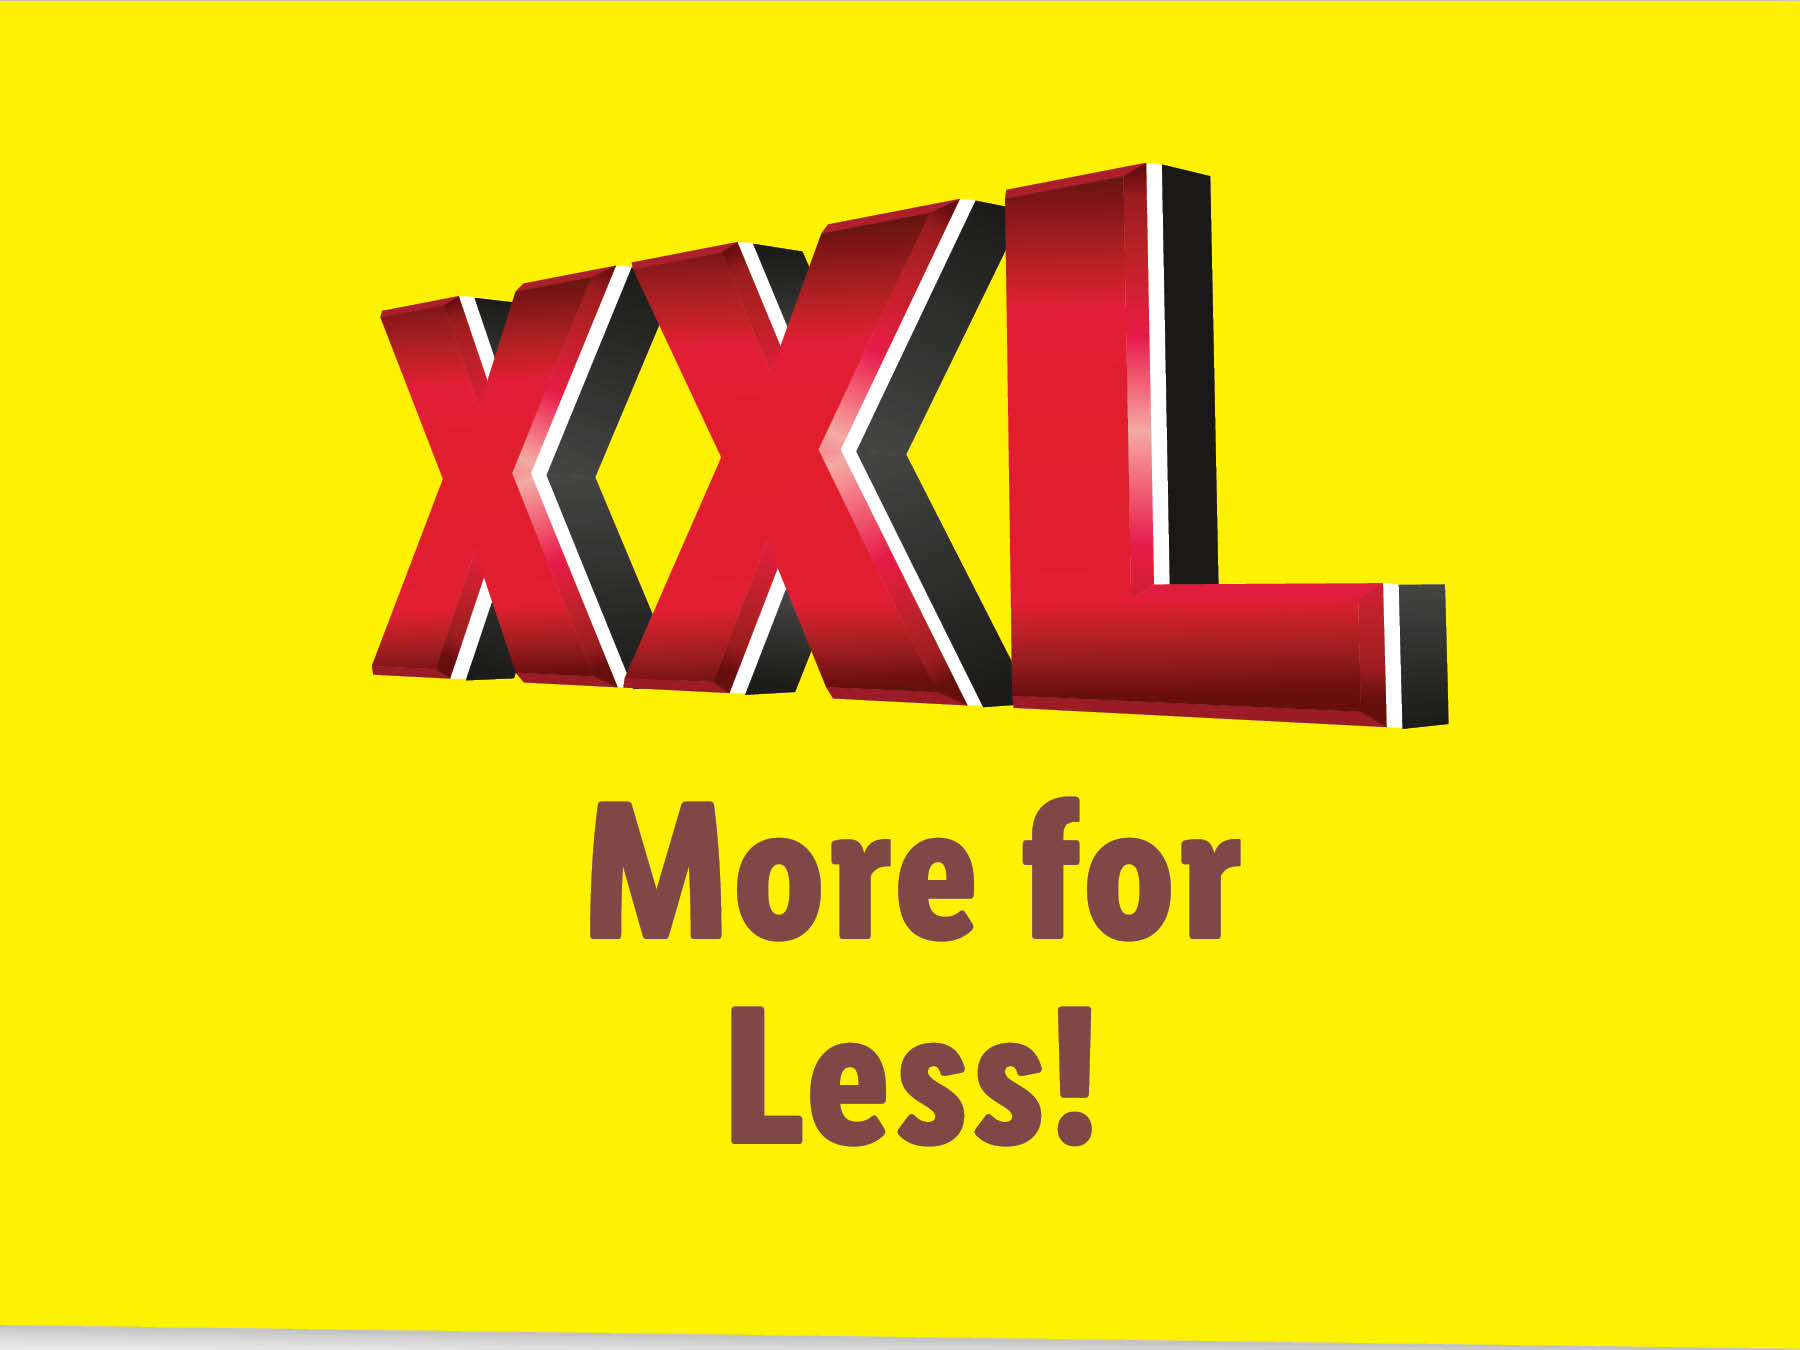 XXL - More For Less!